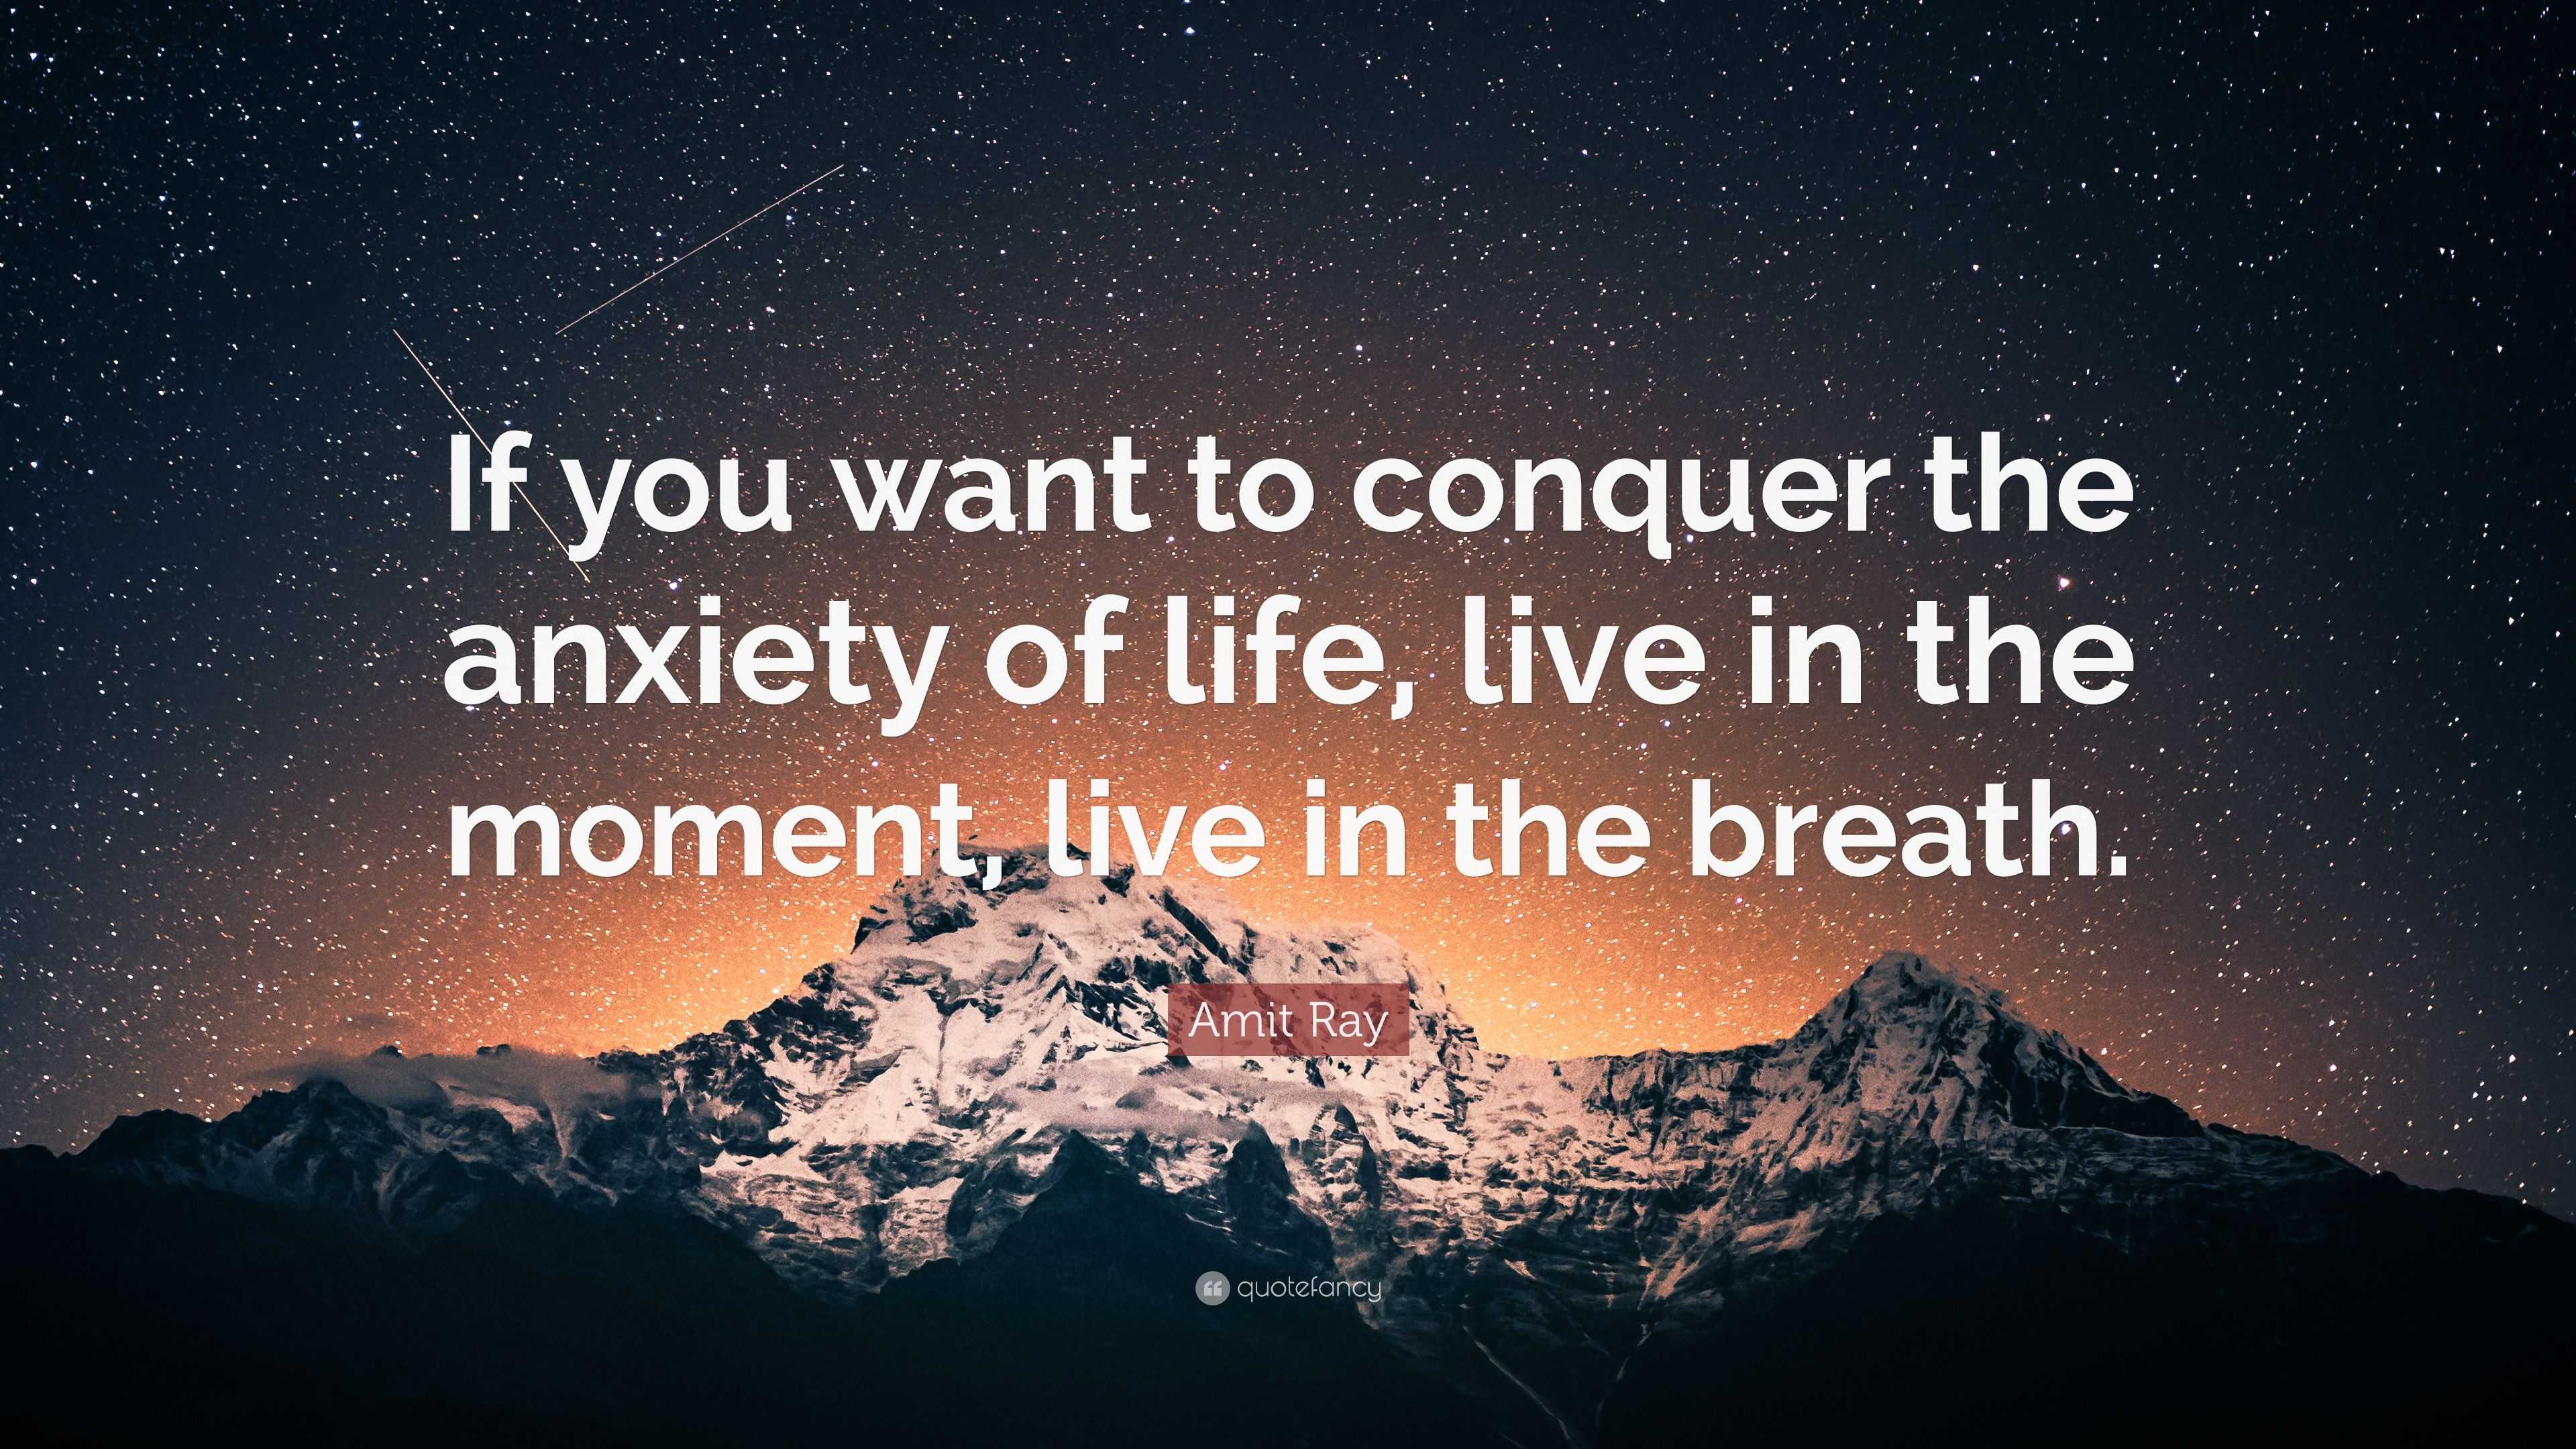 Amit Ray Quote “If you want to conquer the anxiety of